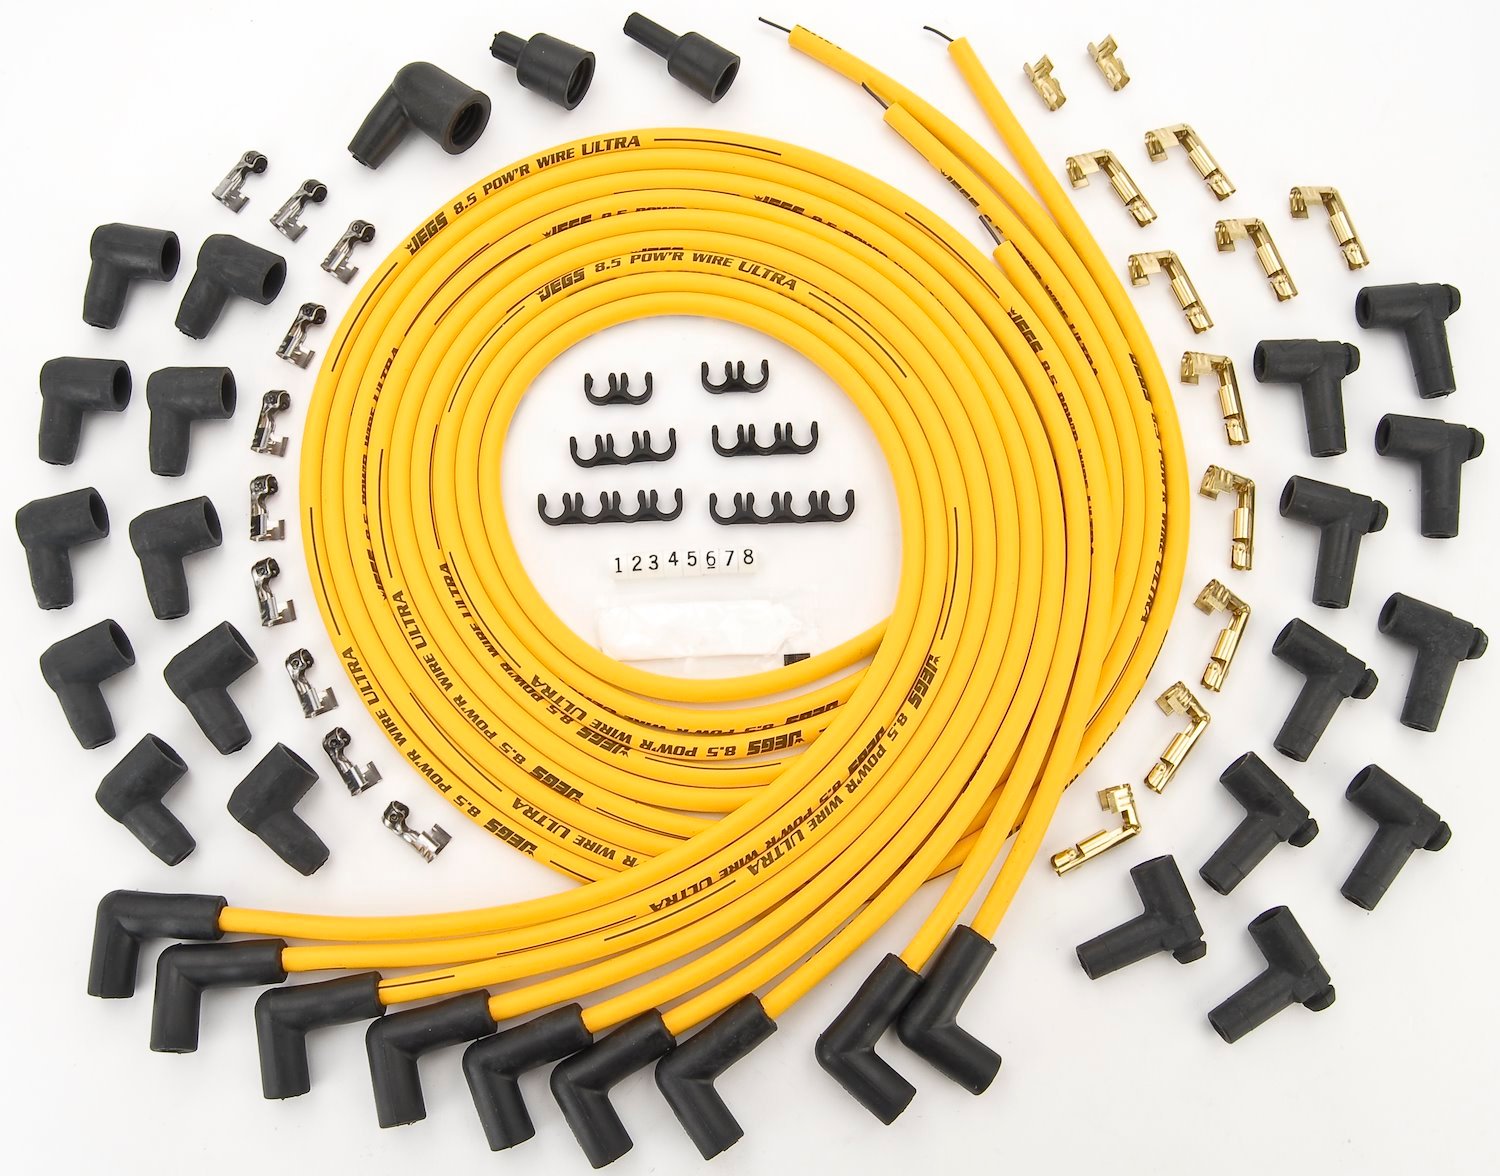 8.5mm Yellow Ultra Pow'r Wires Small & Big